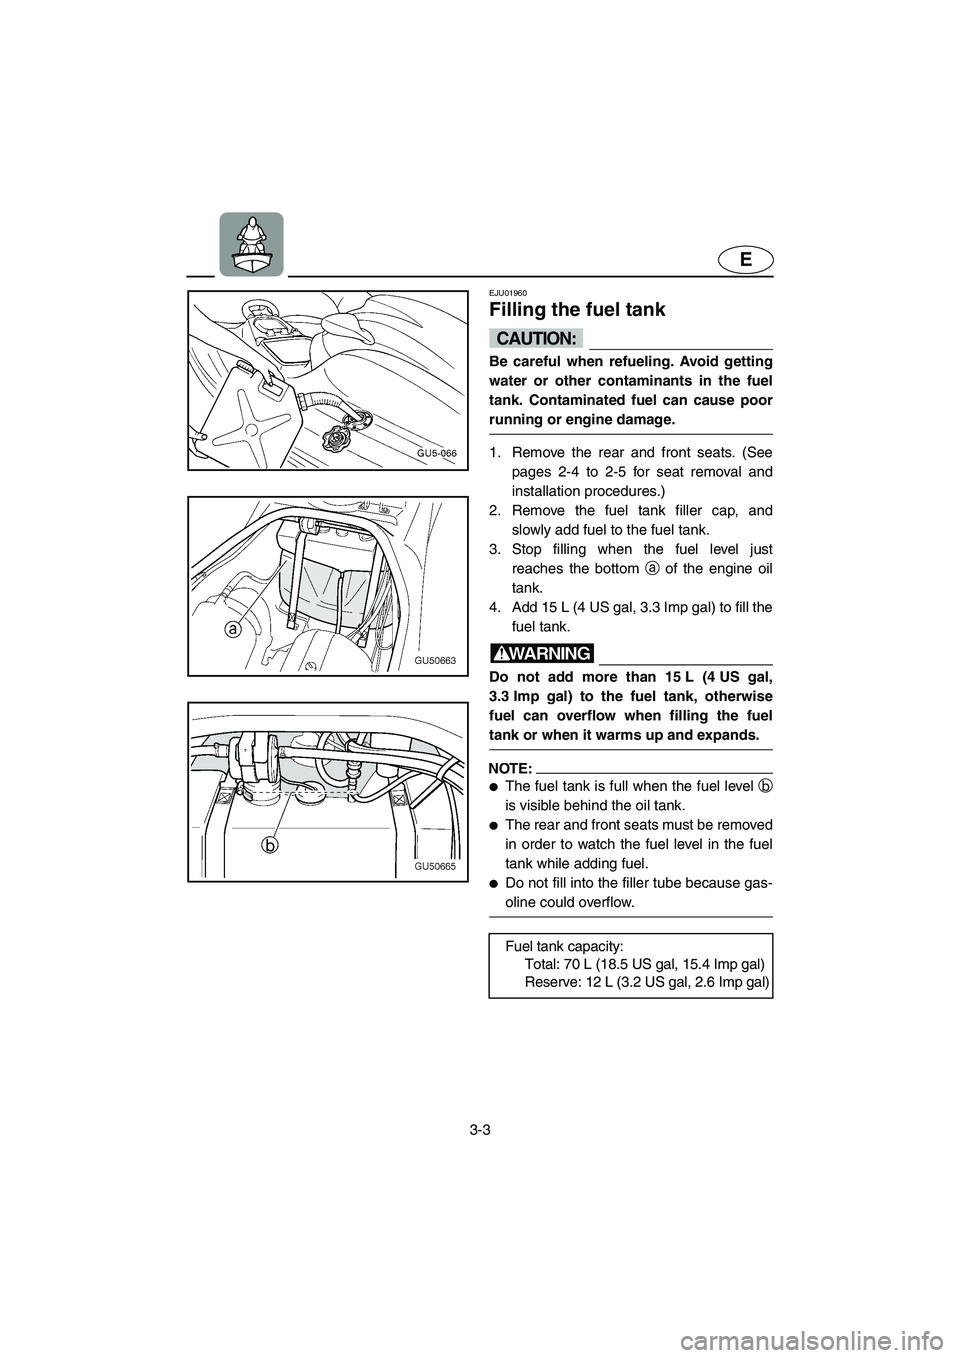 YAMAHA SUV 1200 2003  Owners Manual 3-3
E
EJU01960
Filling the fuel tank 
CAUTION:@ Be careful when refueling. Avoid getting
water or other contaminants in the fuel
tank. Contaminated fuel can cause poor
running or engine damage. 
@
1. 